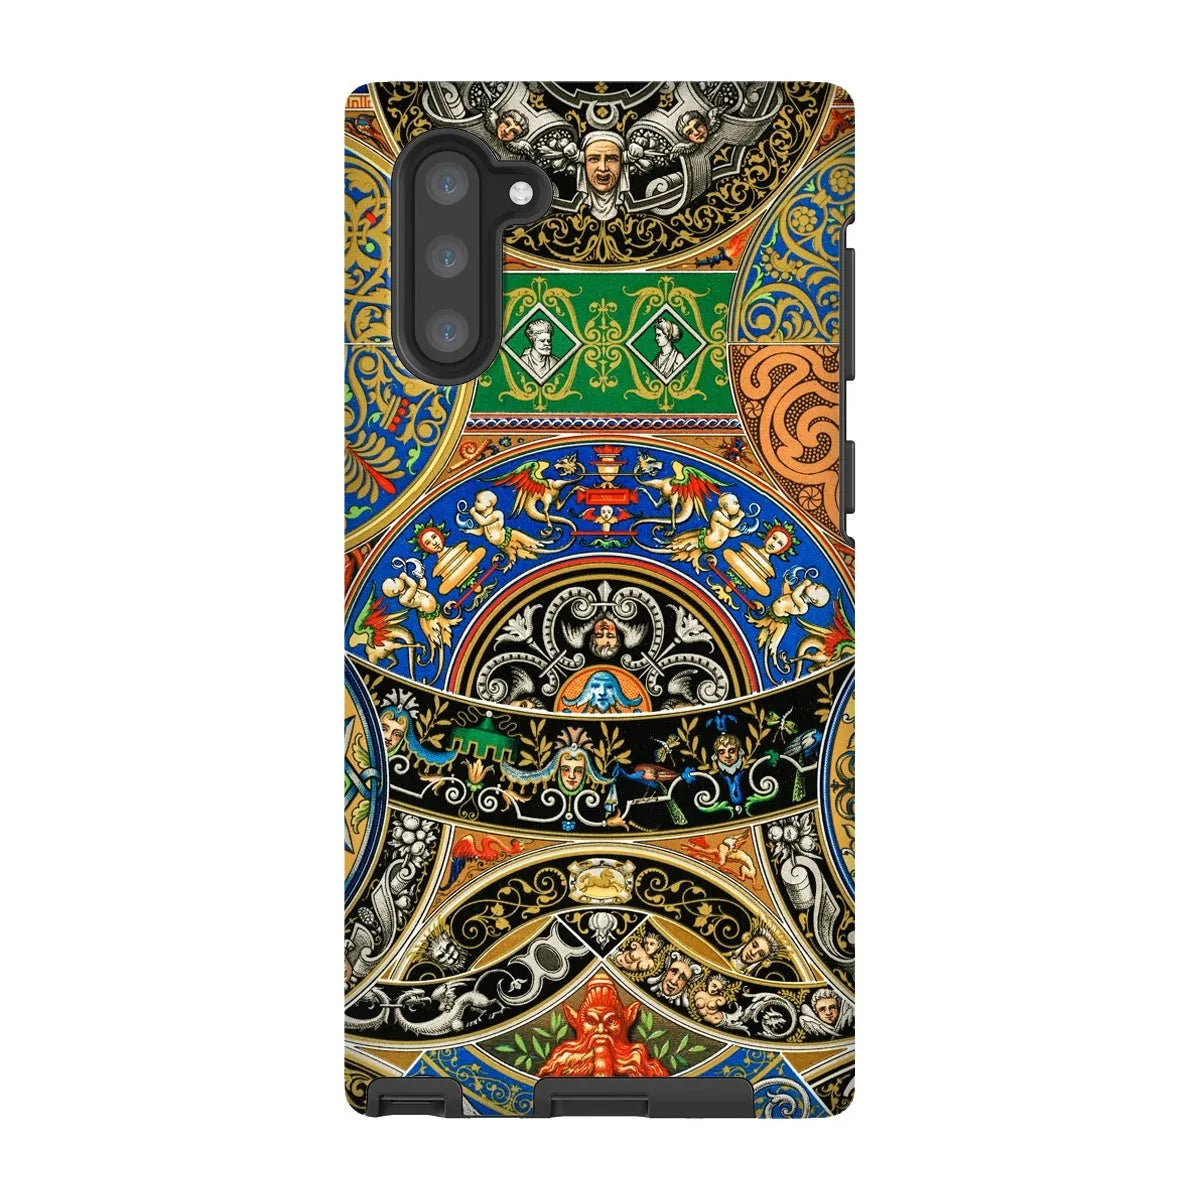 Renaissance Pattern 2 By Auguste Racinet Tough Phone Case - Samsung Galaxy Note 10 / Gloss - Mobile Phone Cases